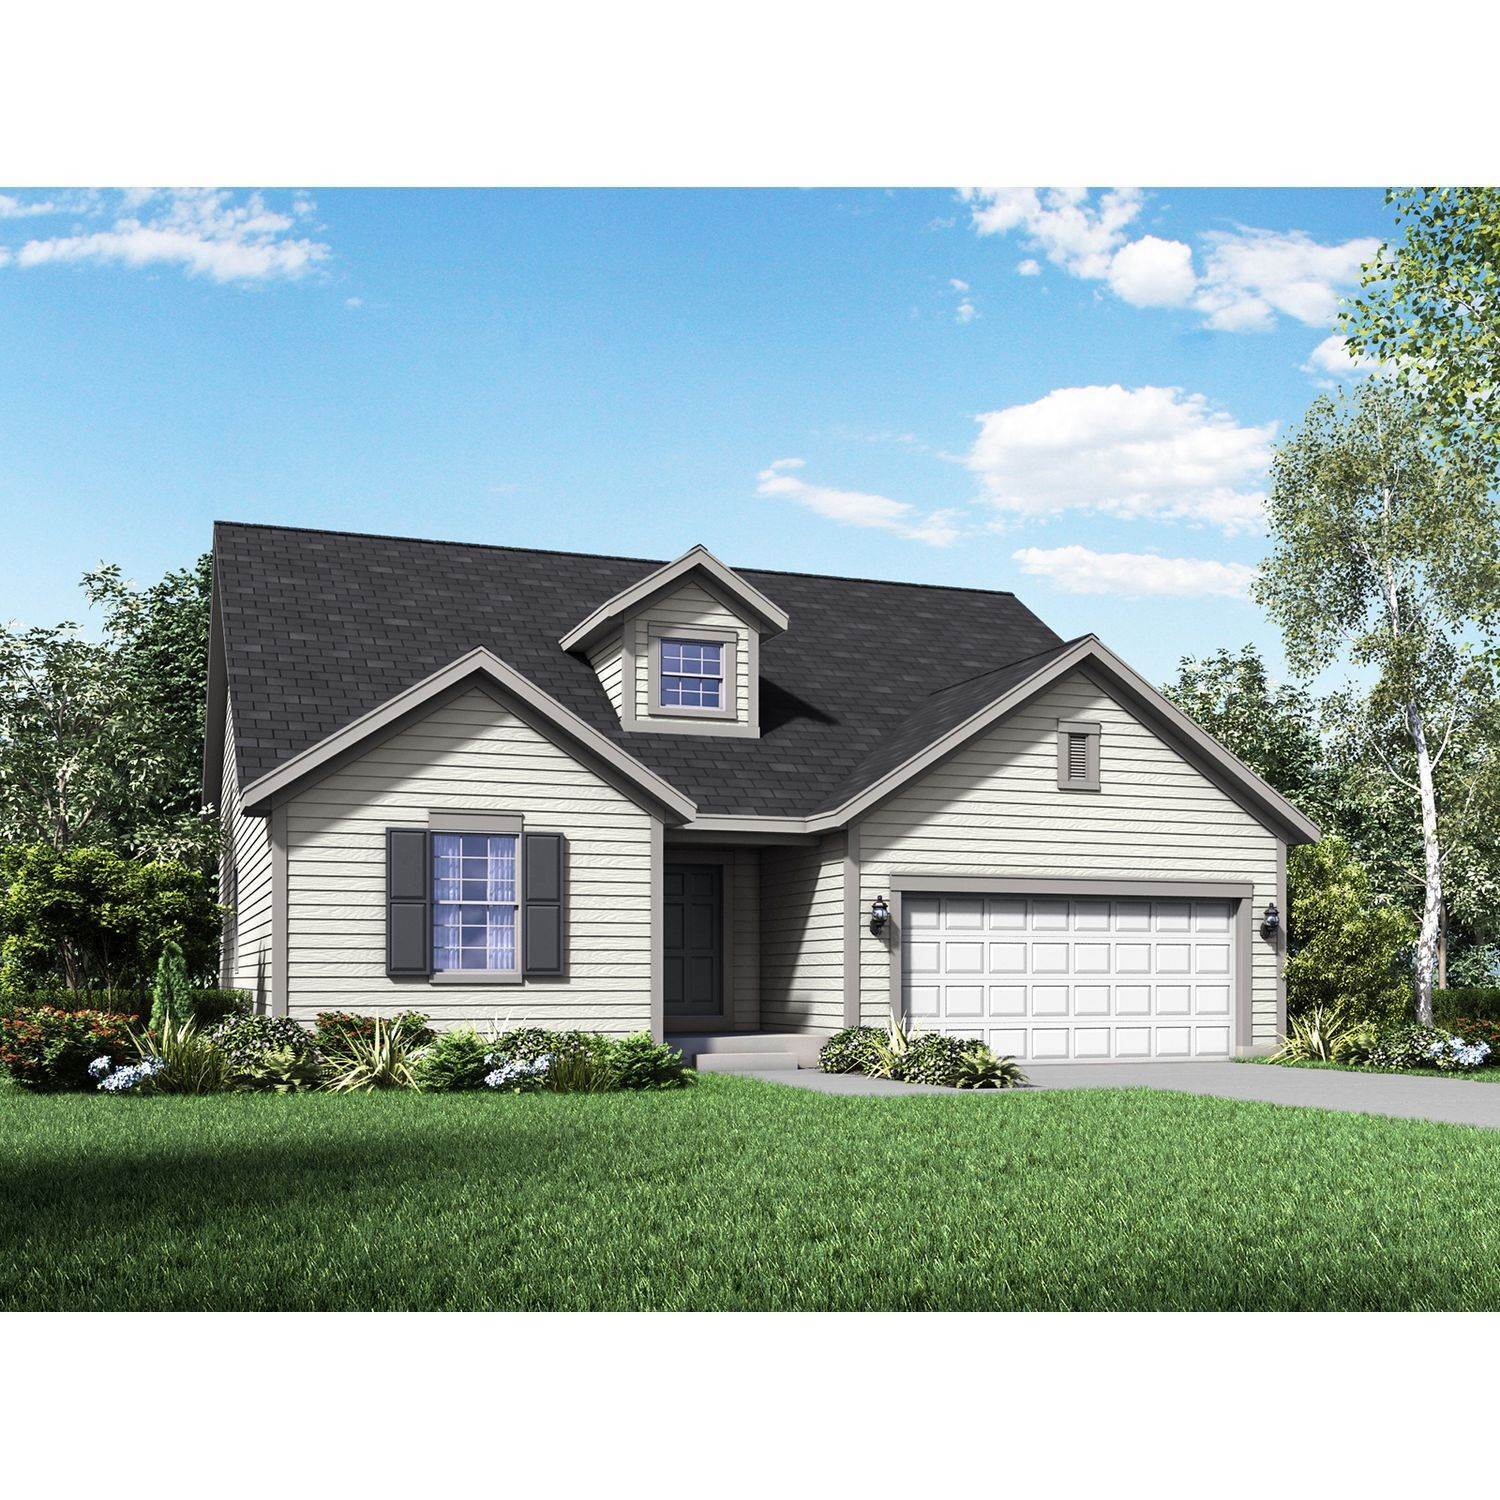 21. Single Family for Sale at Sun Prairie, WI 53590